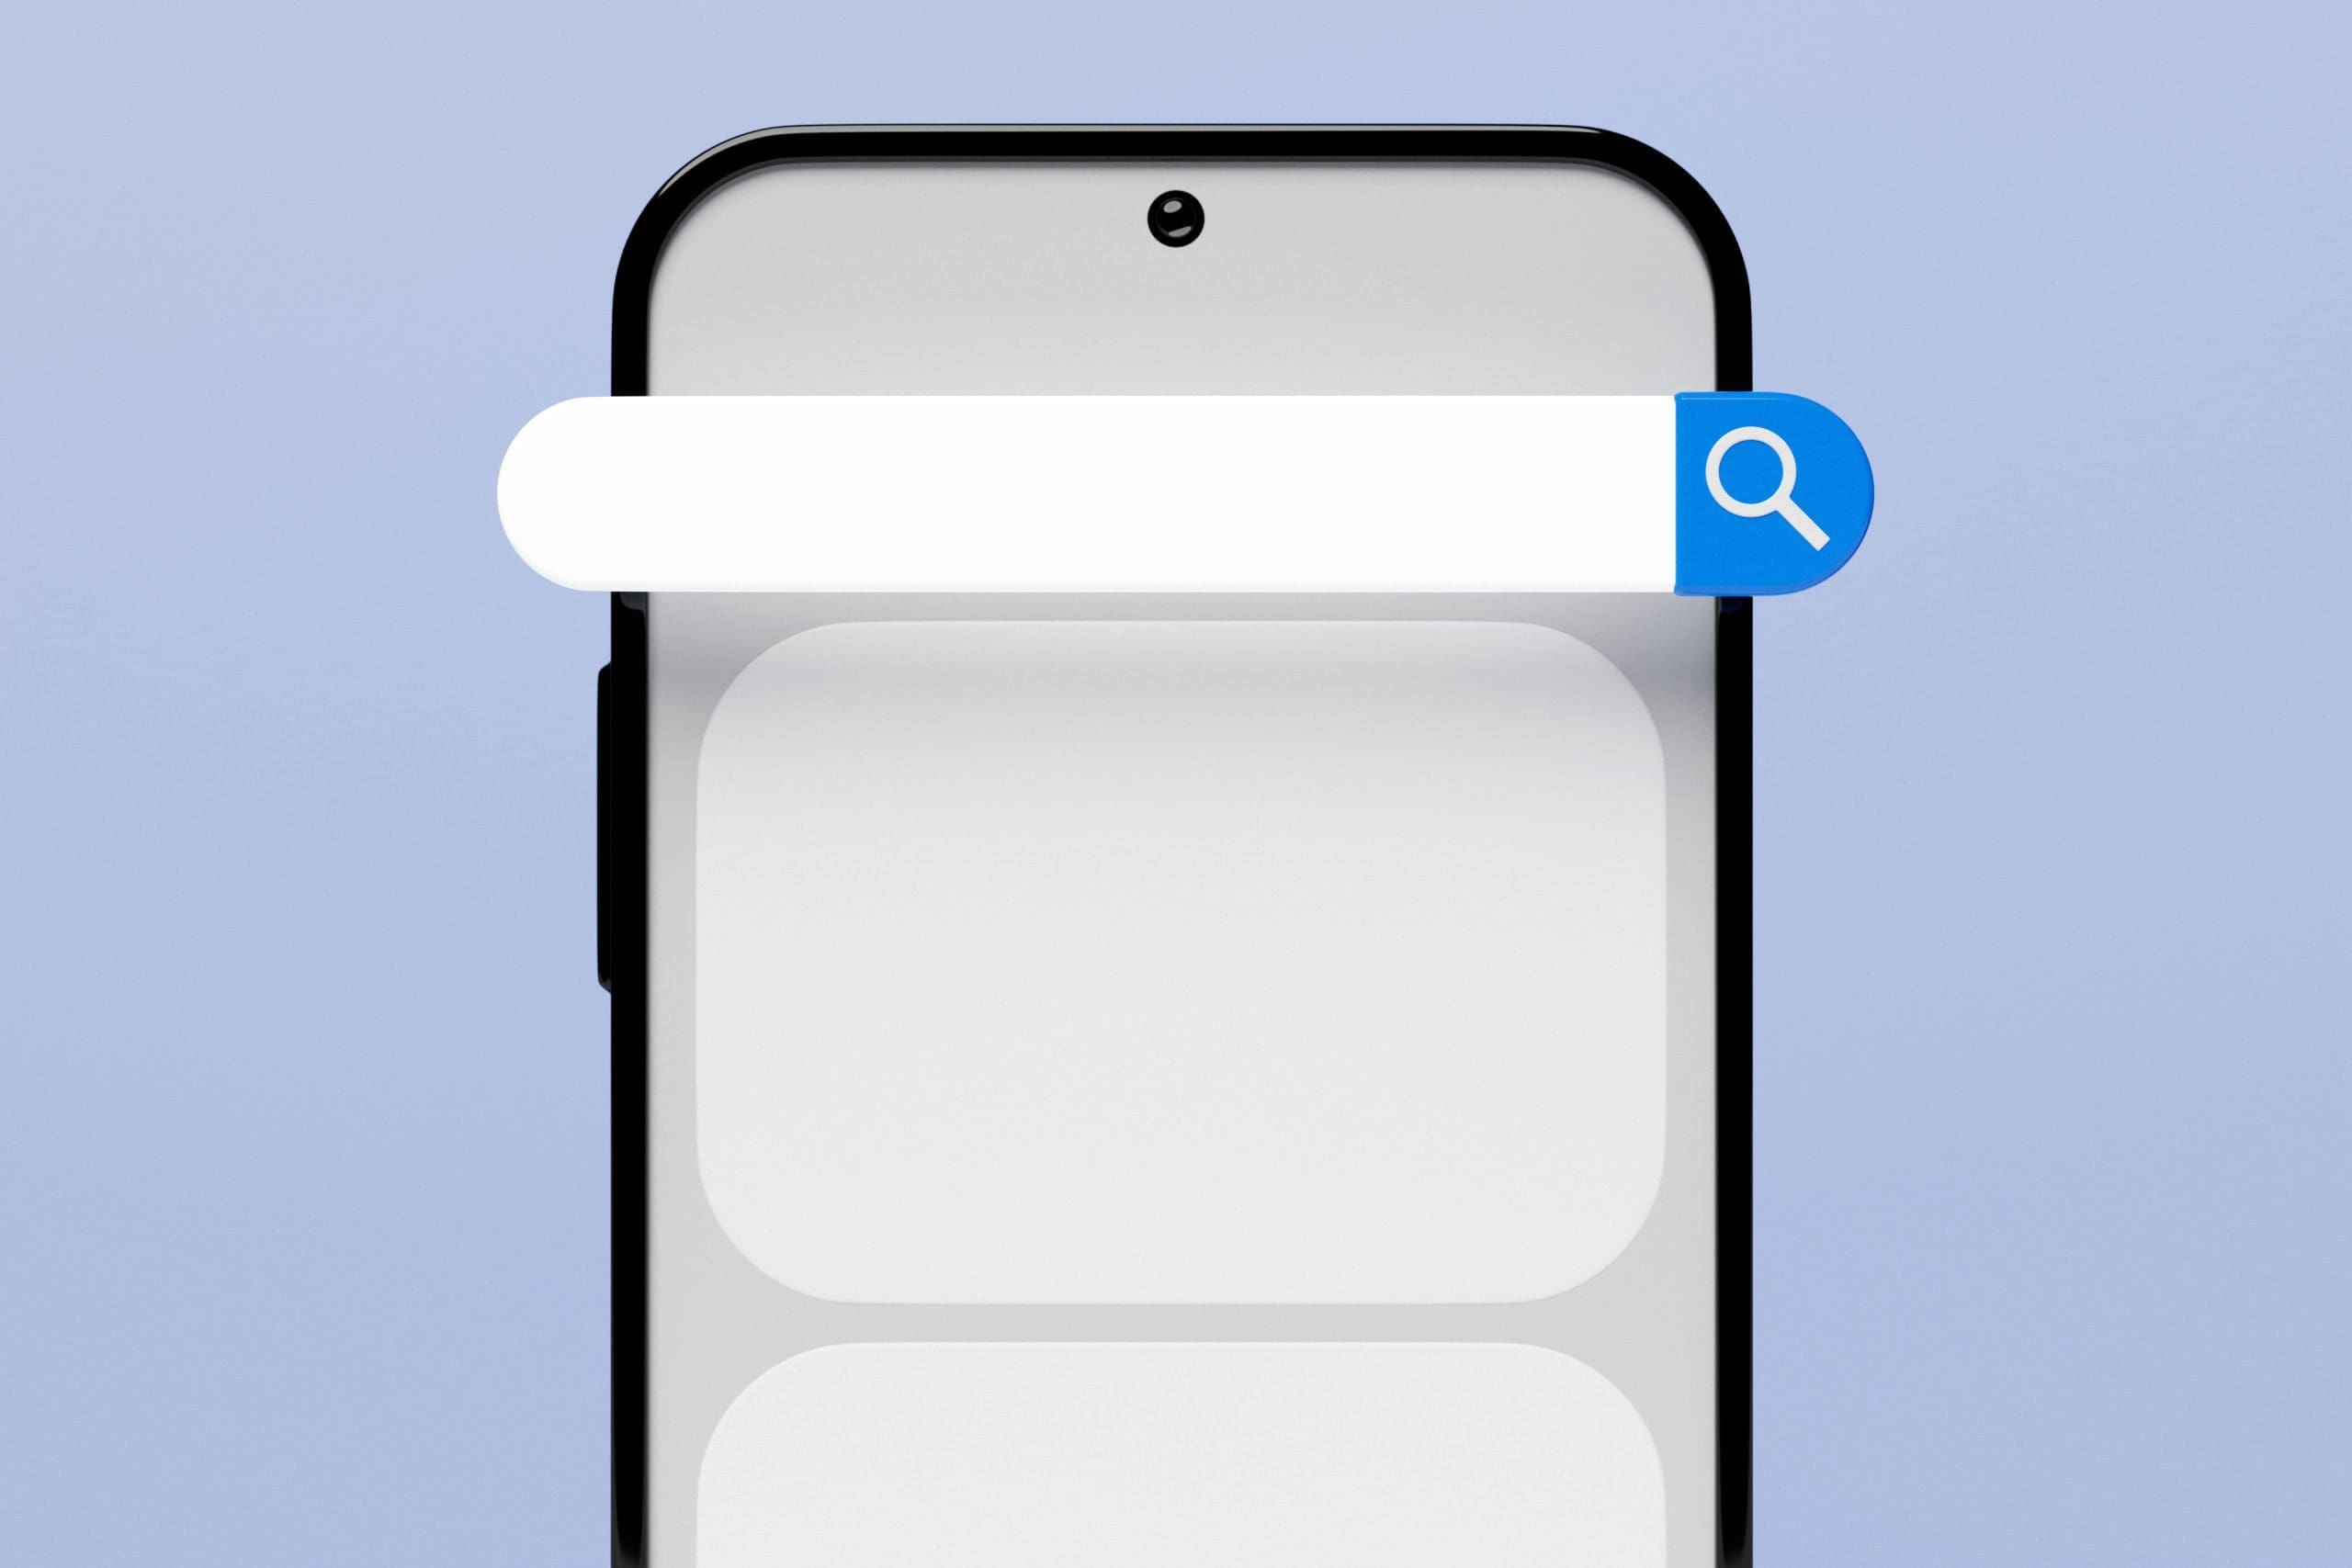 Smartphone display showing a search bar with a magnifying glass icon at the top, set against a blue background.